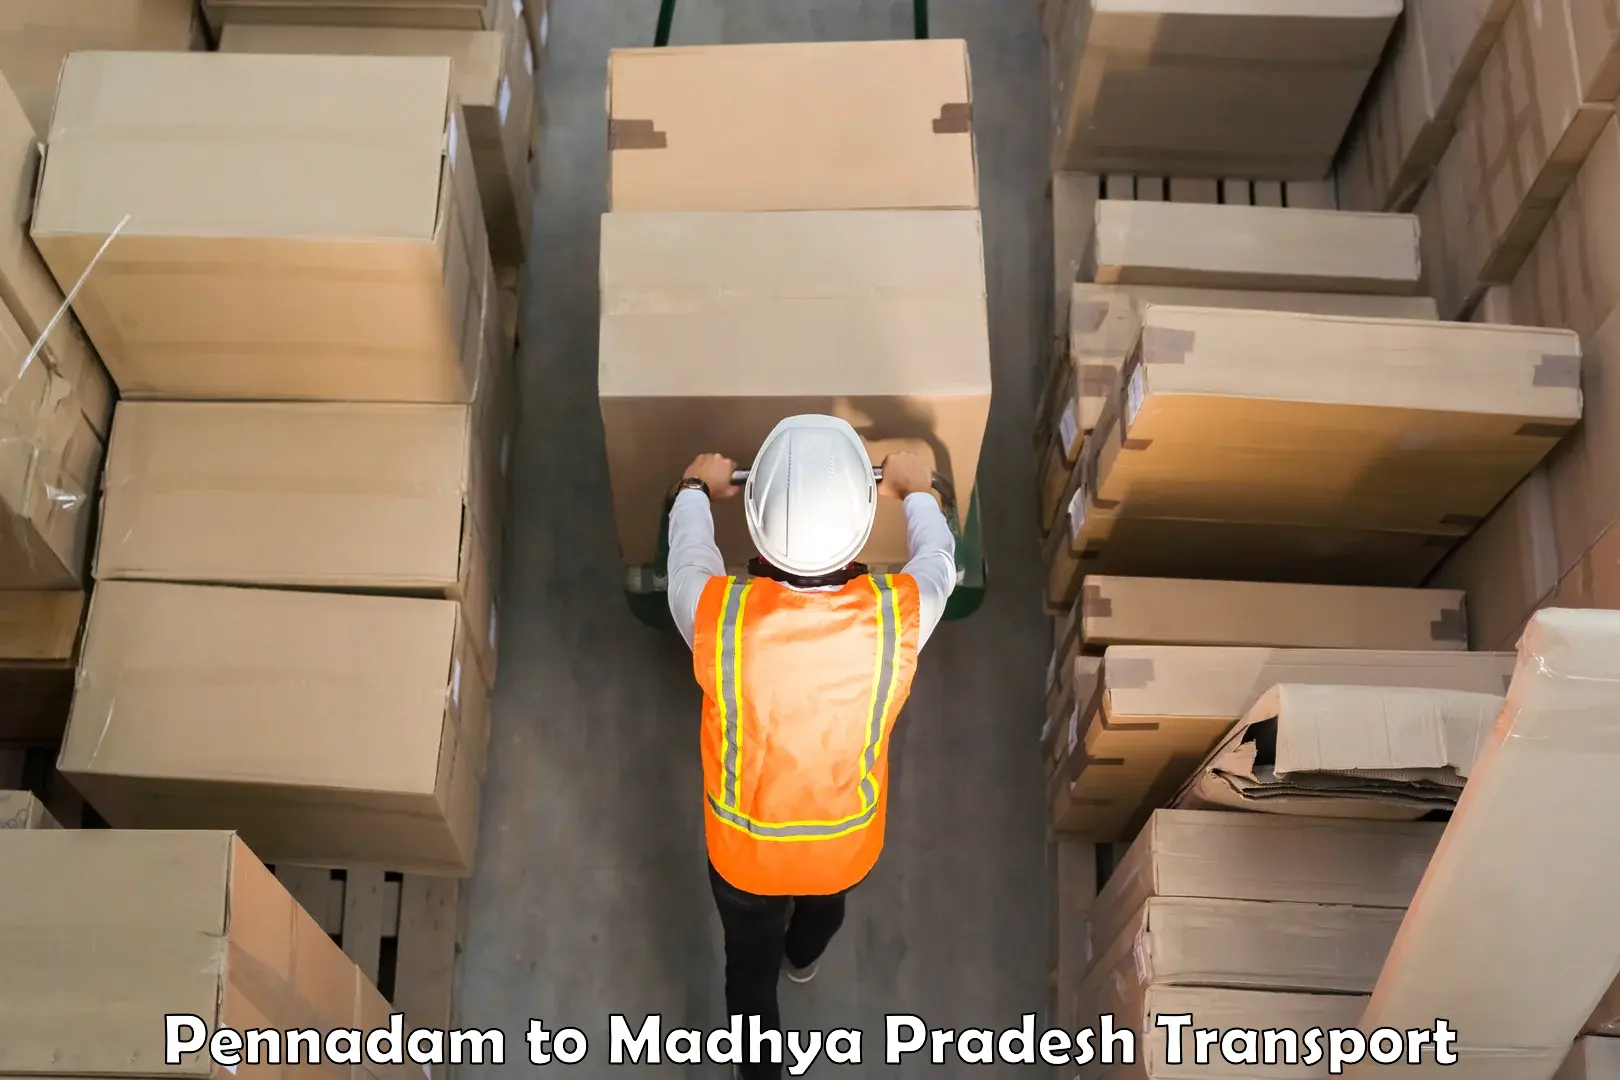 Truck transport companies in India Pennadam to Chand Chaurai